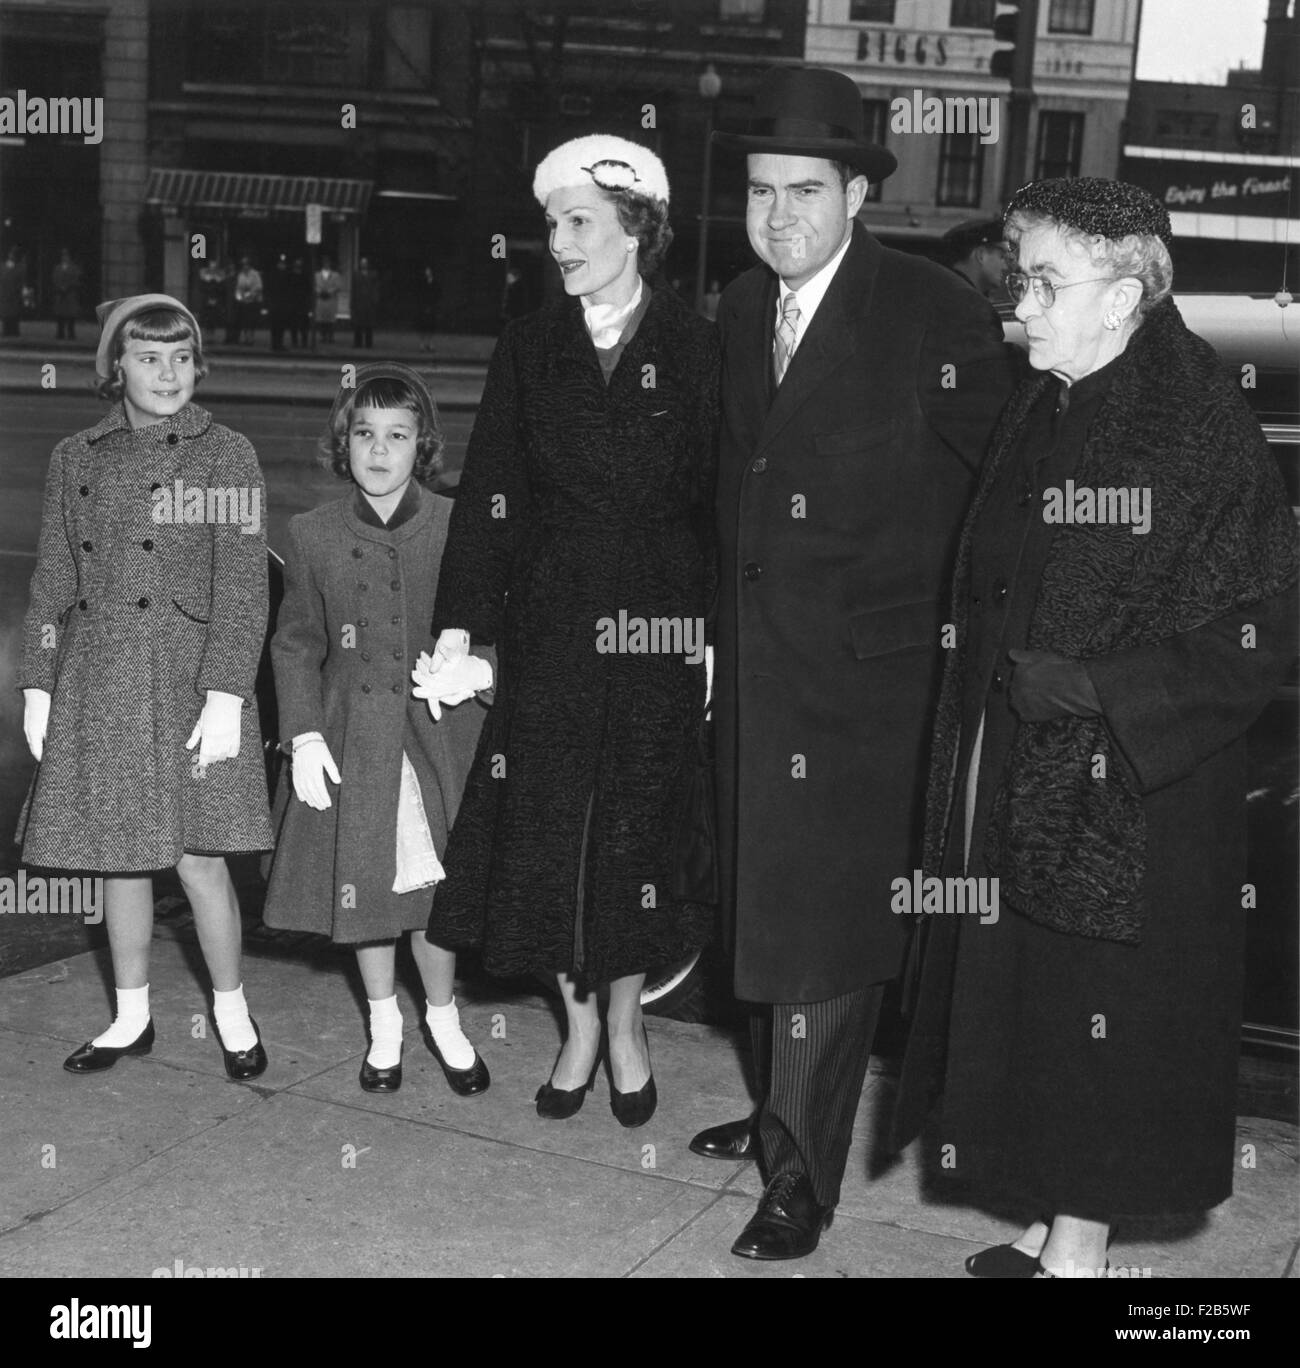 Vice President Richard Nixon arrives for the private Sunday swearing in ceremonies. The White House, January 20, 1957. L-R: Tricia, Julie, Pat, Richard, and Hannah Milhous Nixon, his Mother. - (BSLOC 2014 16 31) Stock Photo